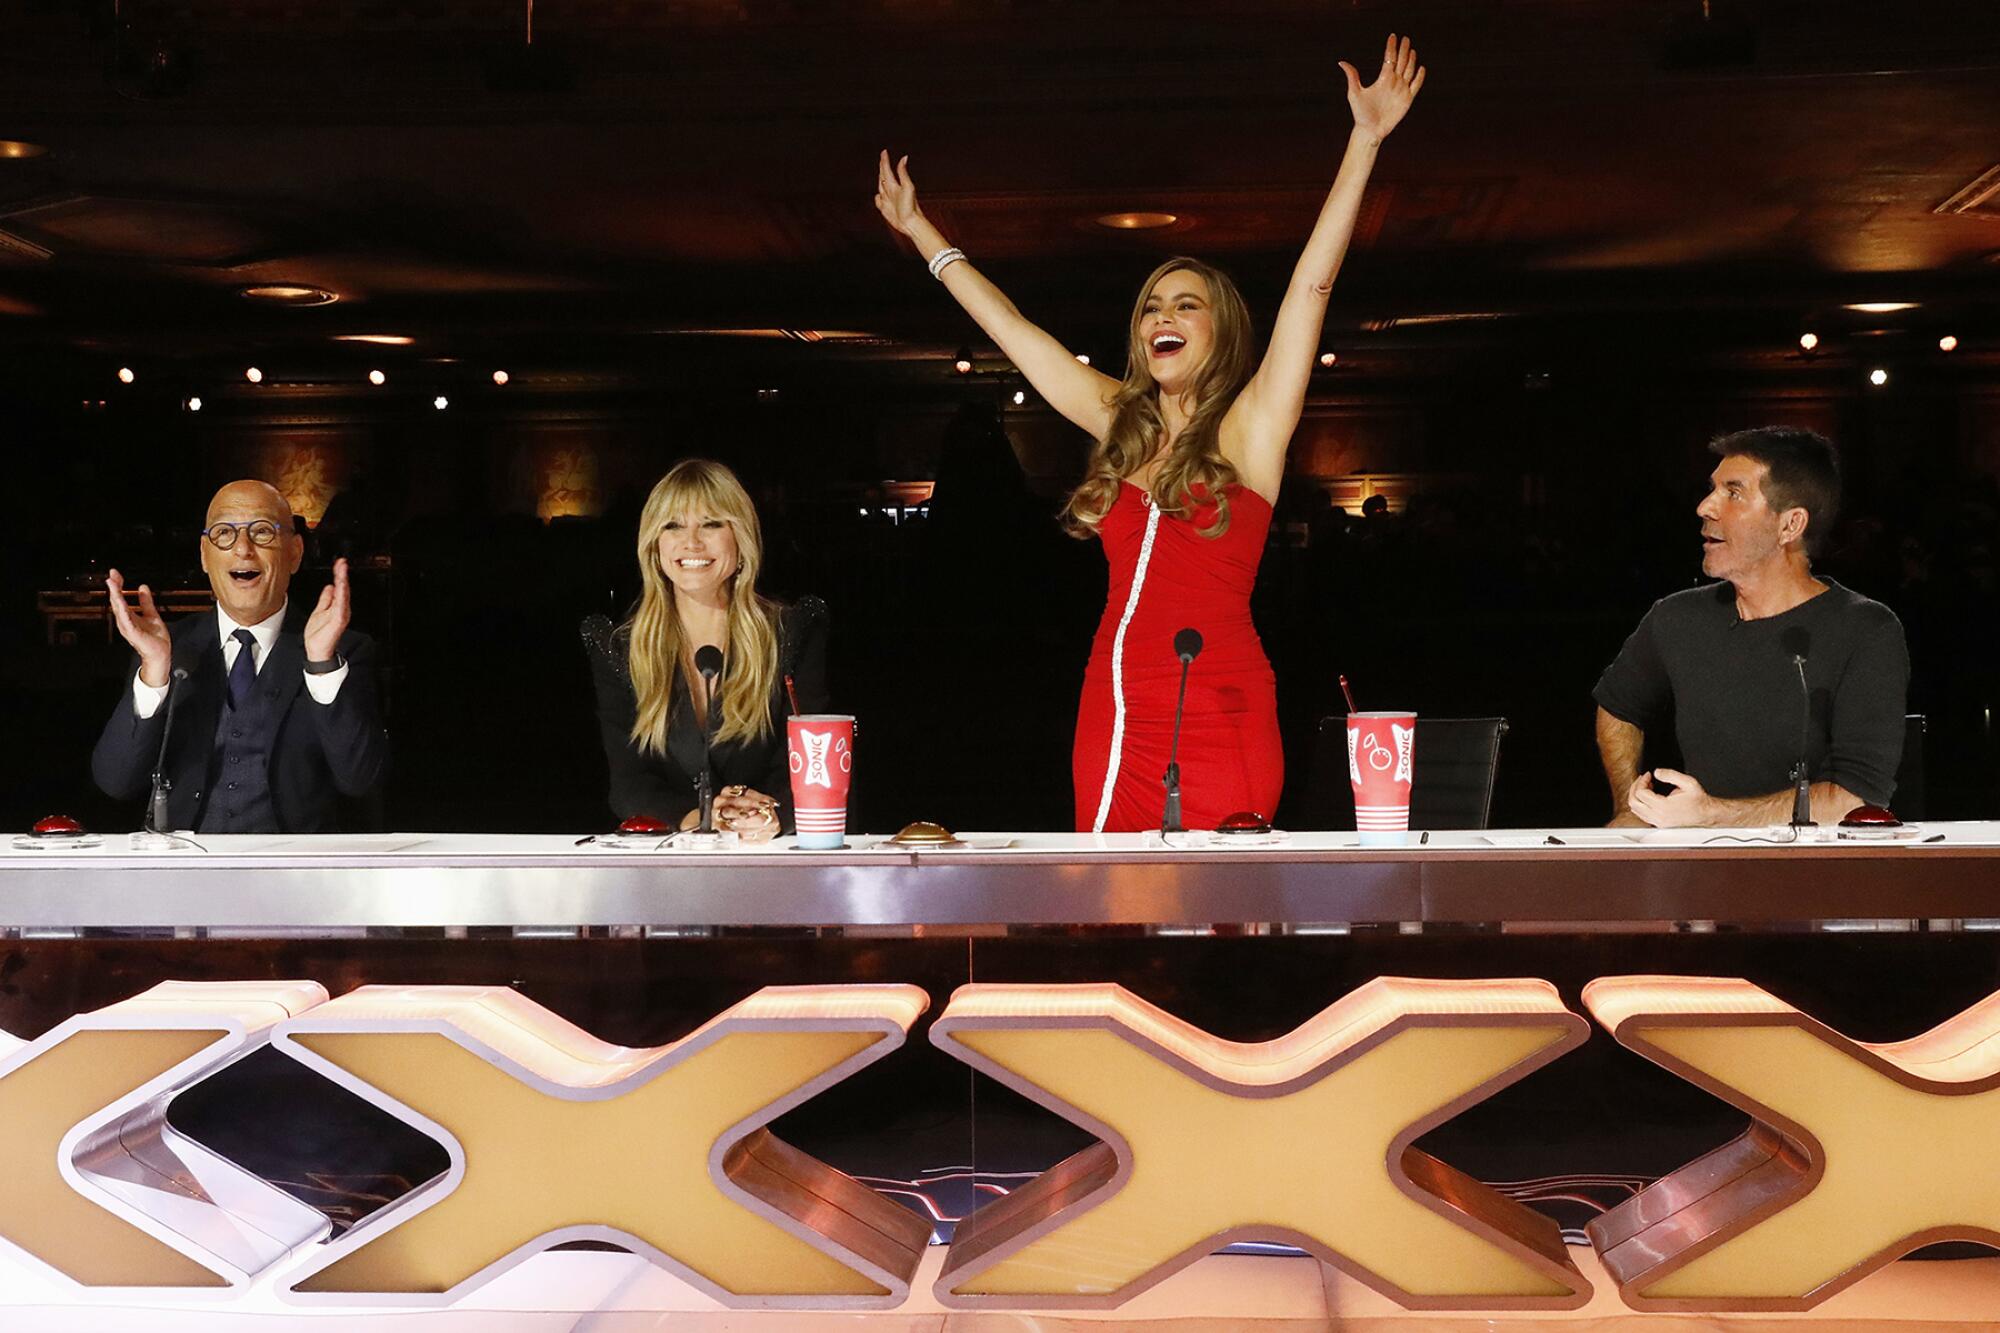 The judges of "America’s Got Talent" during a taping.